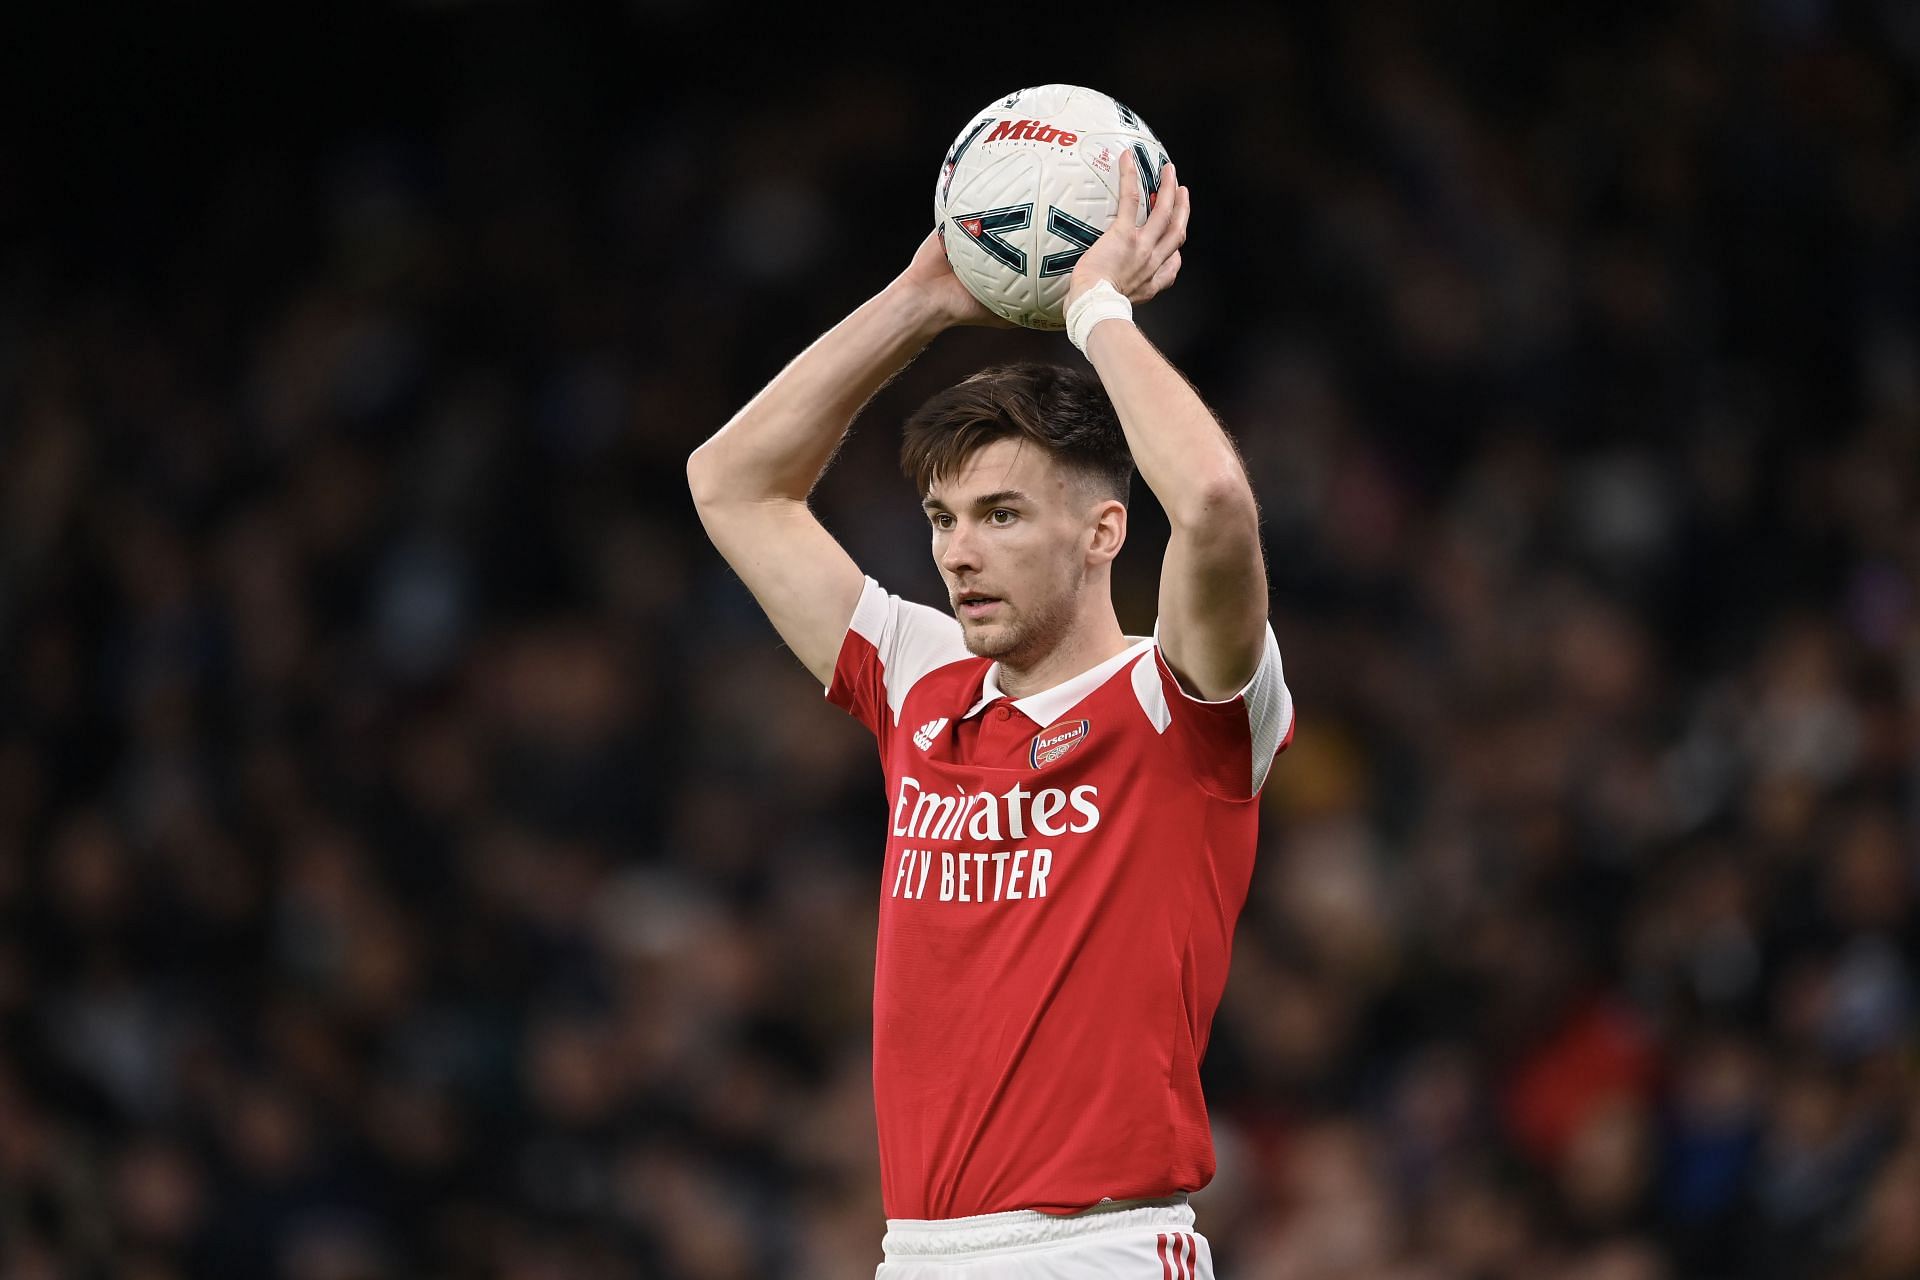 Kieren Tierney could be sold in the summer.